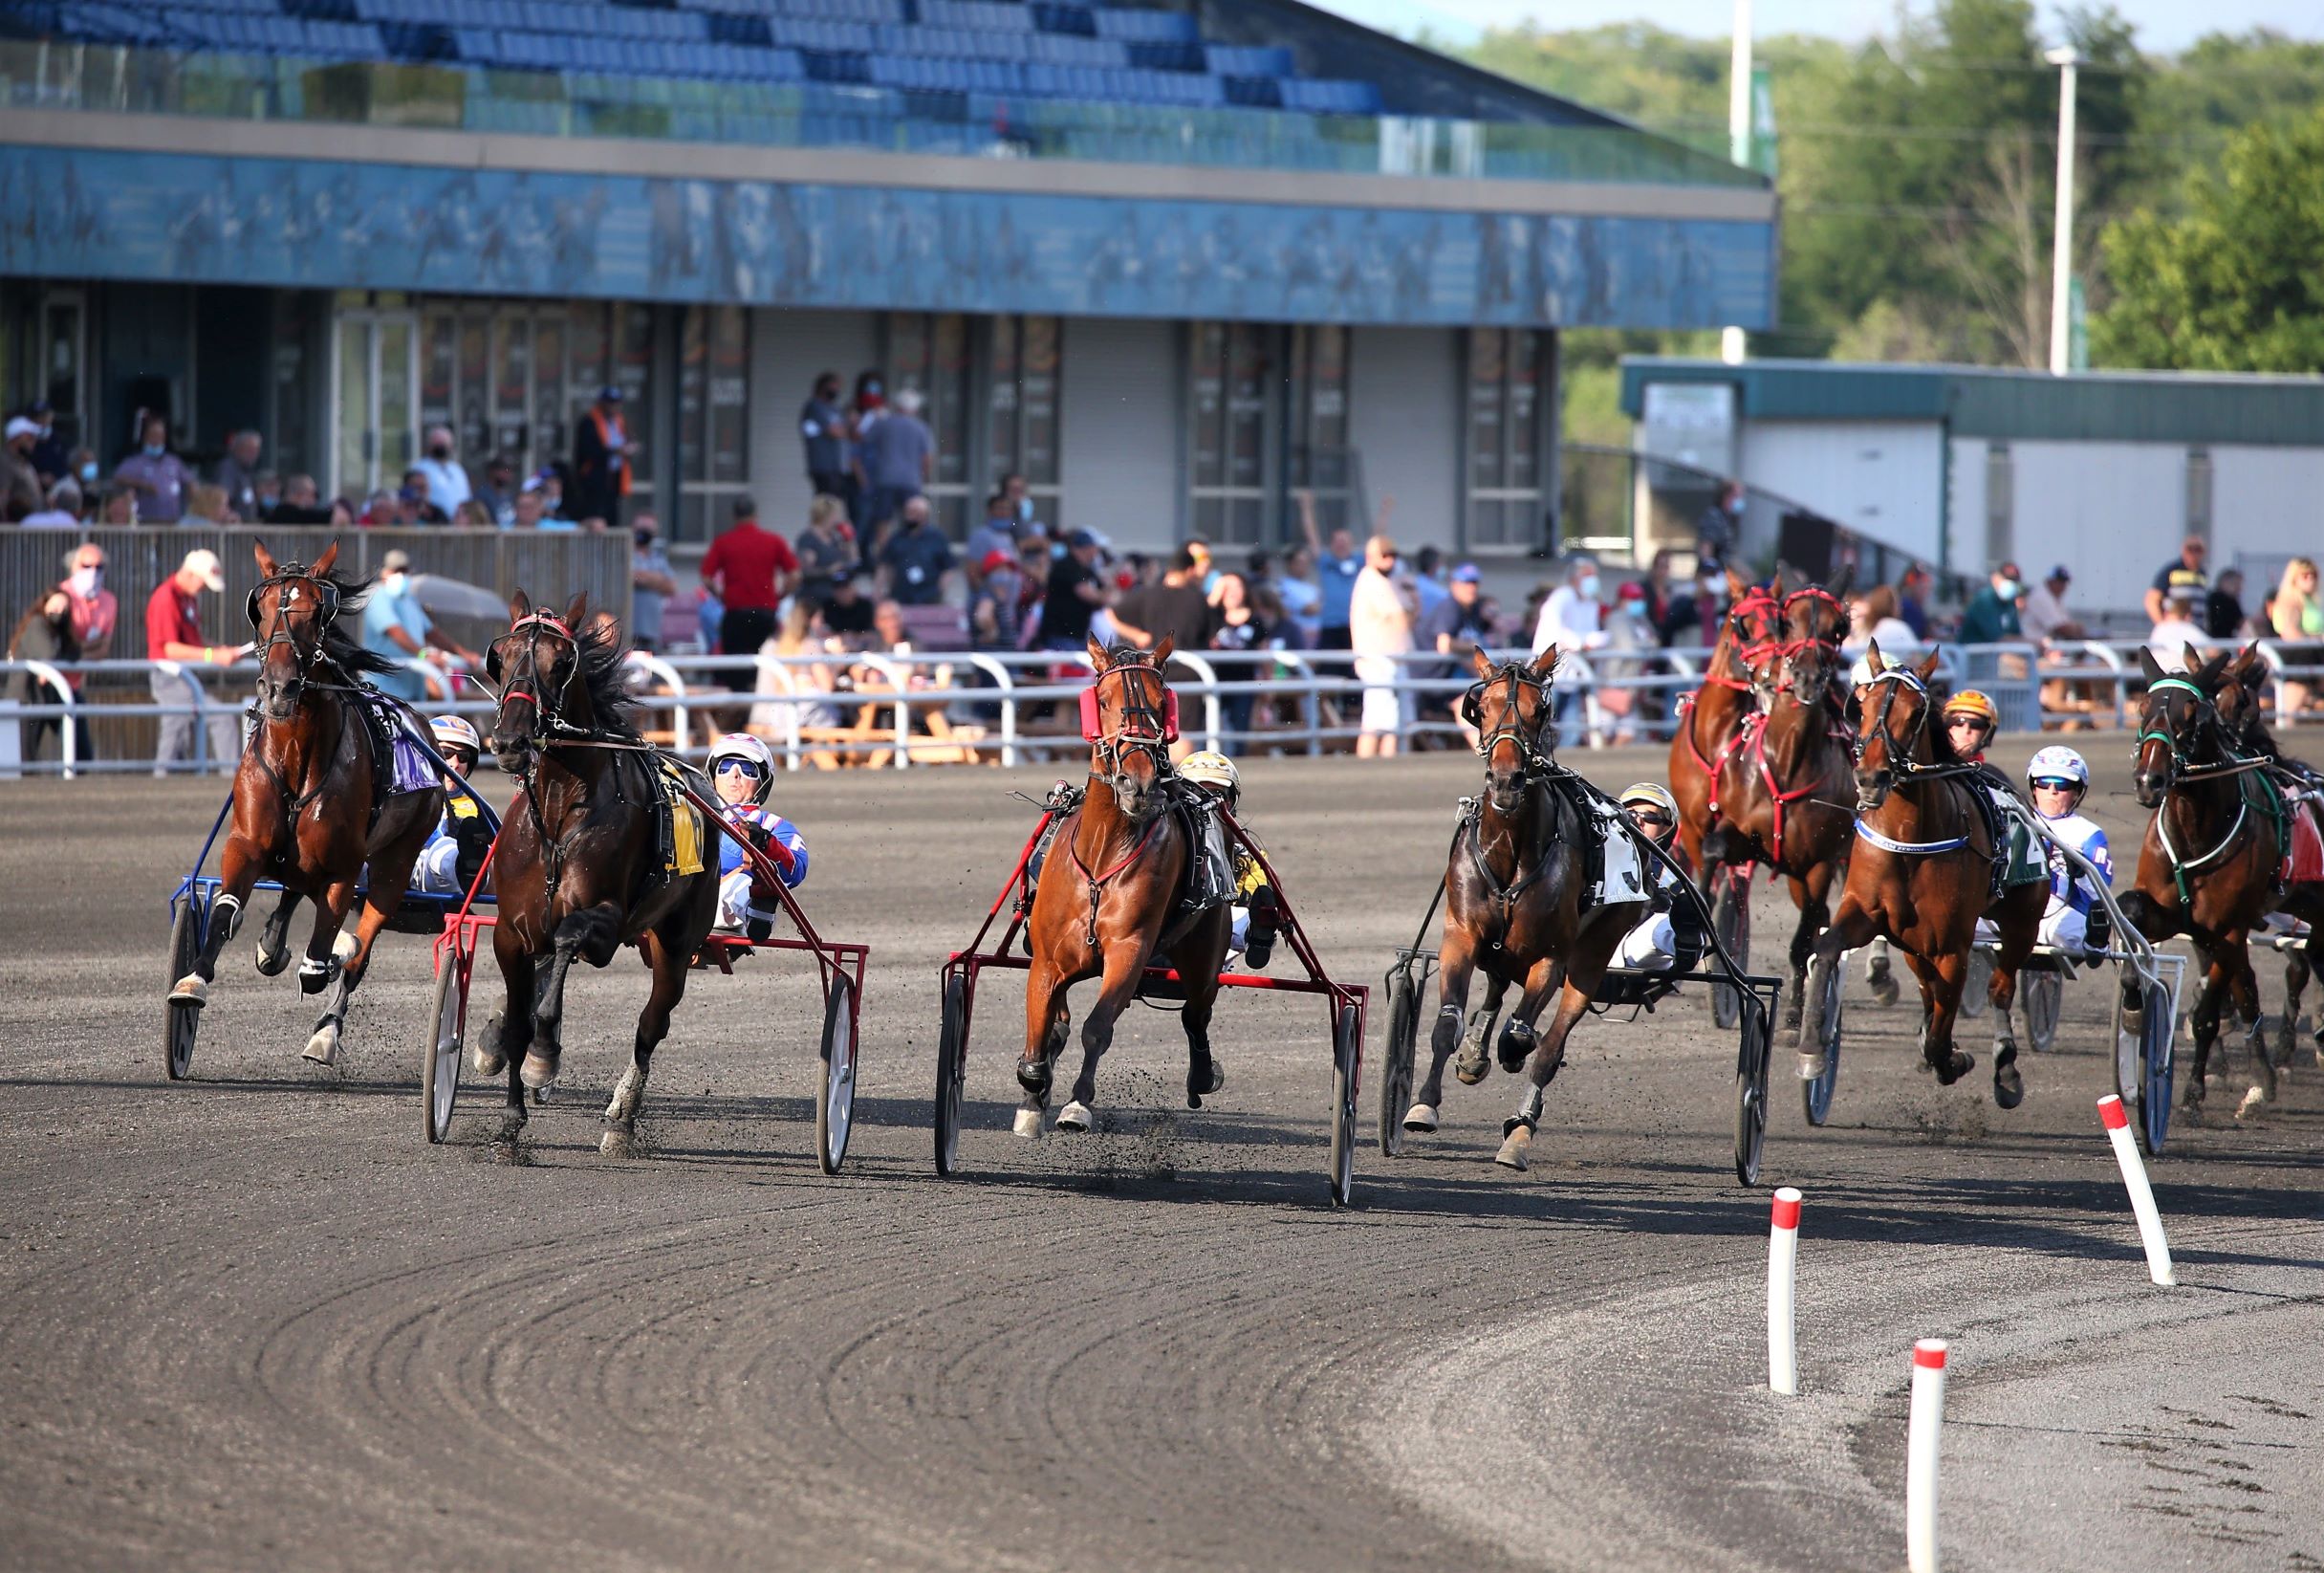 Fans cheer Ontario’s top trotters to impressive Gold efforts